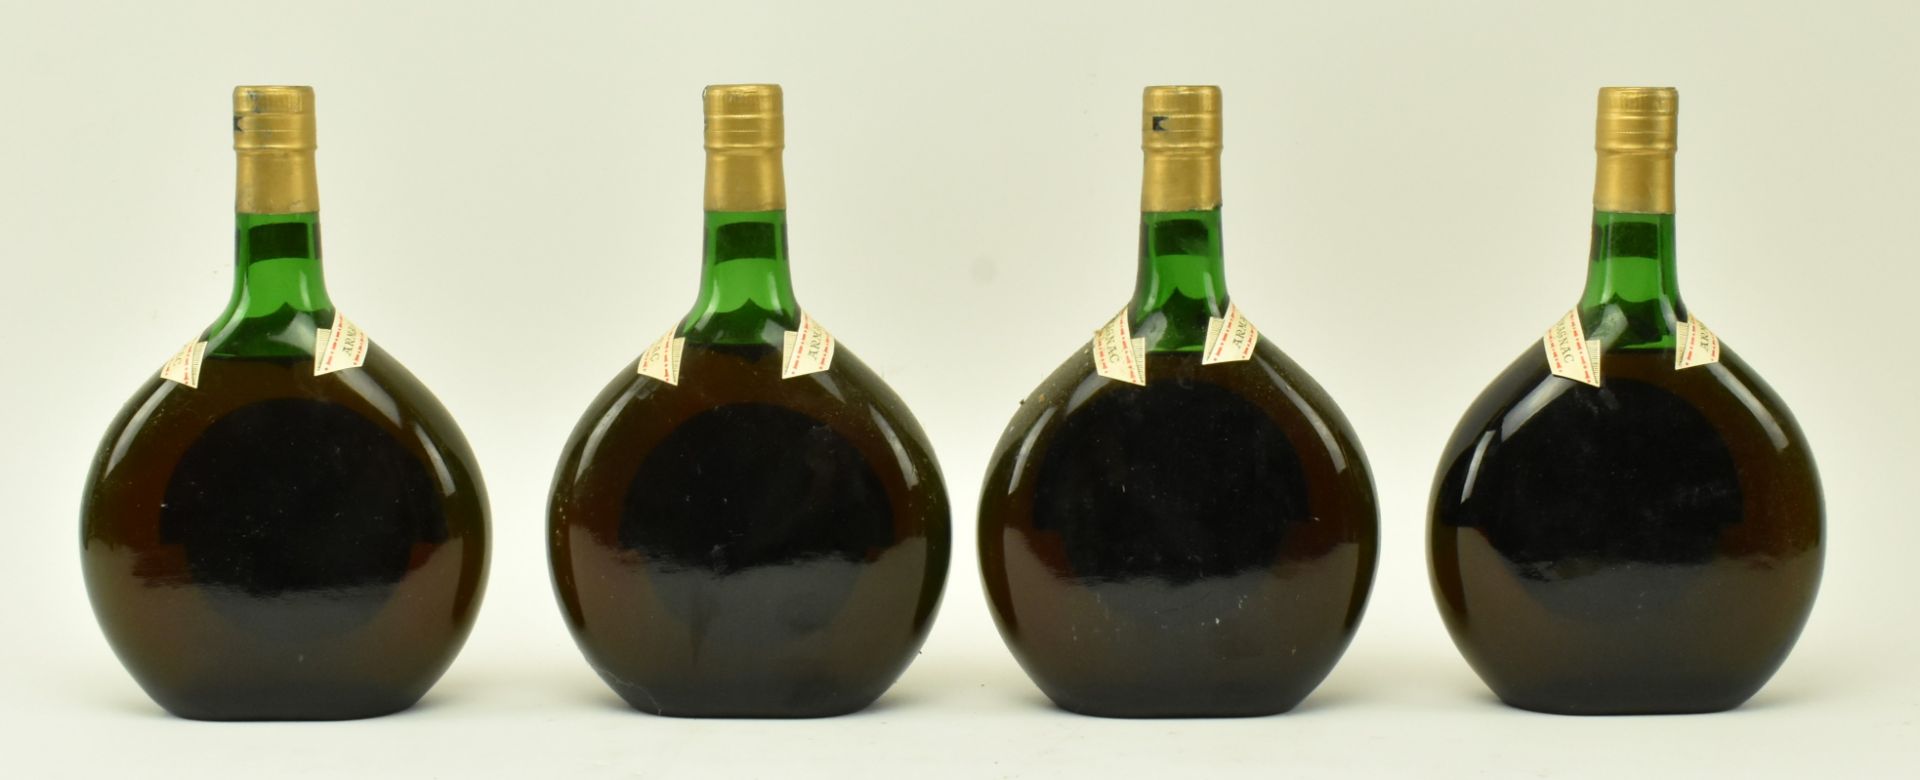 FOUR BOXED TRIANON VSOP ARMAGNAC 1961 BOTTLES (4) - Image 6 of 7